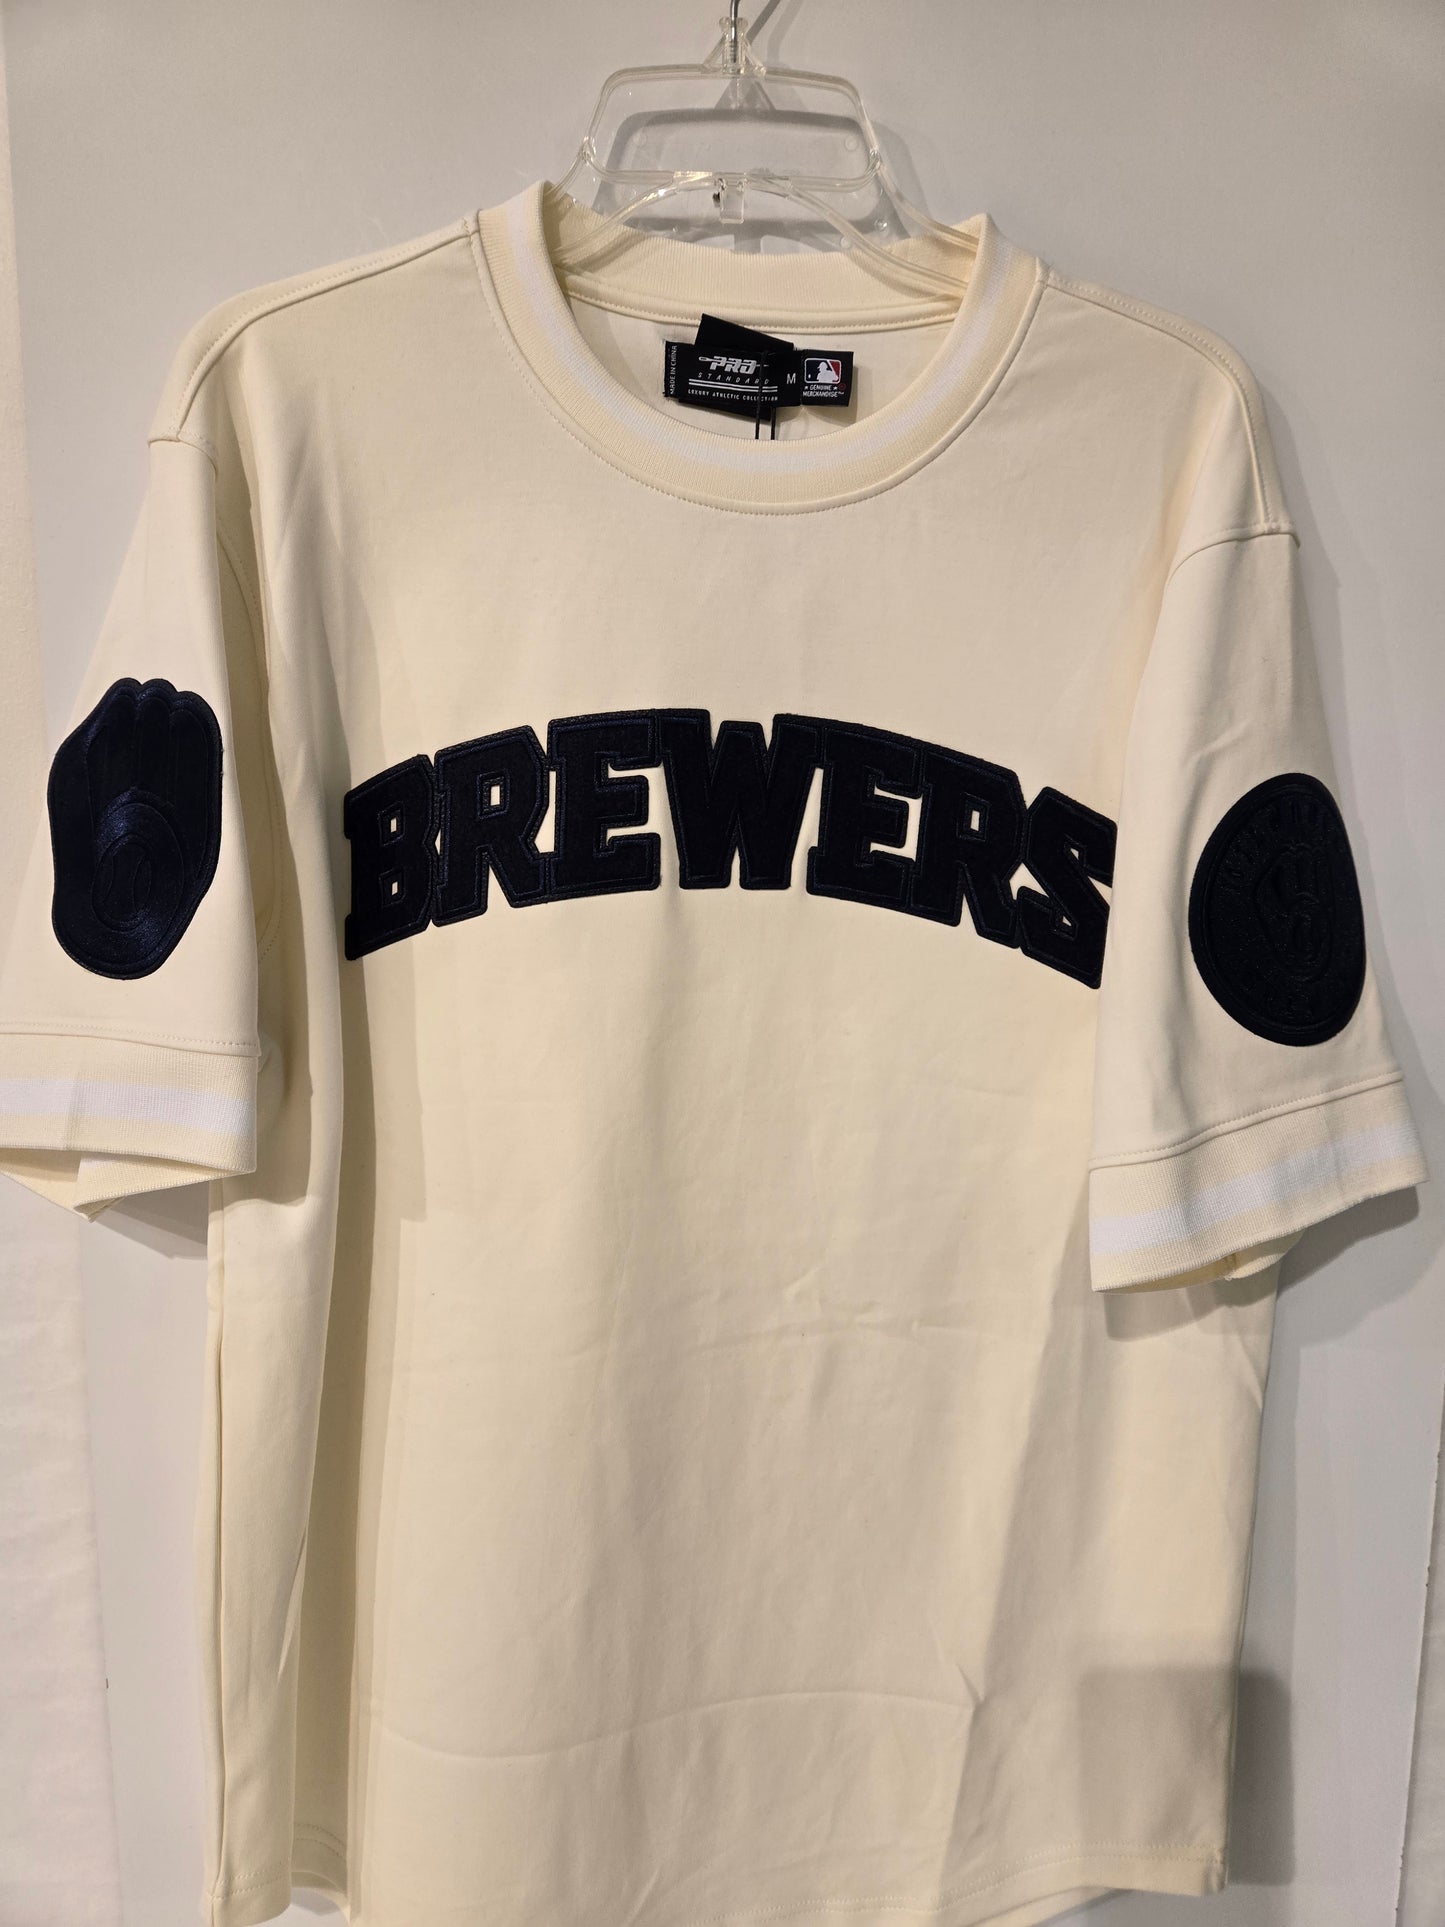 Milwaukee Brewers Cream with Whites Strip on Collar and Sleeves and Black Writing